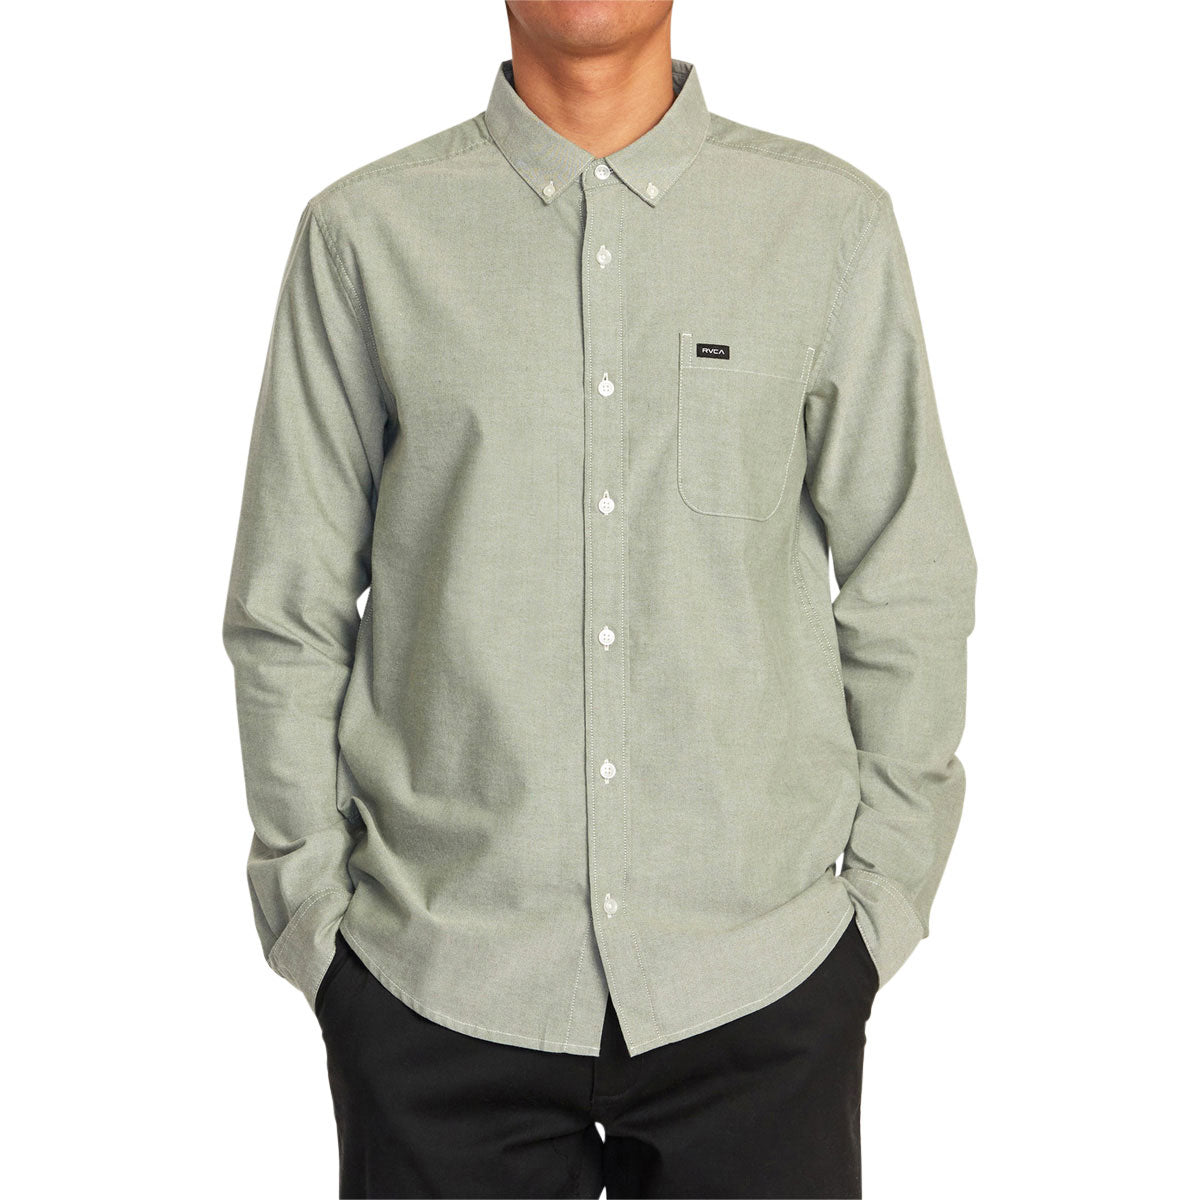 RVCA That'll Do Stretch Long Sleeve Shirt - College Green image 1